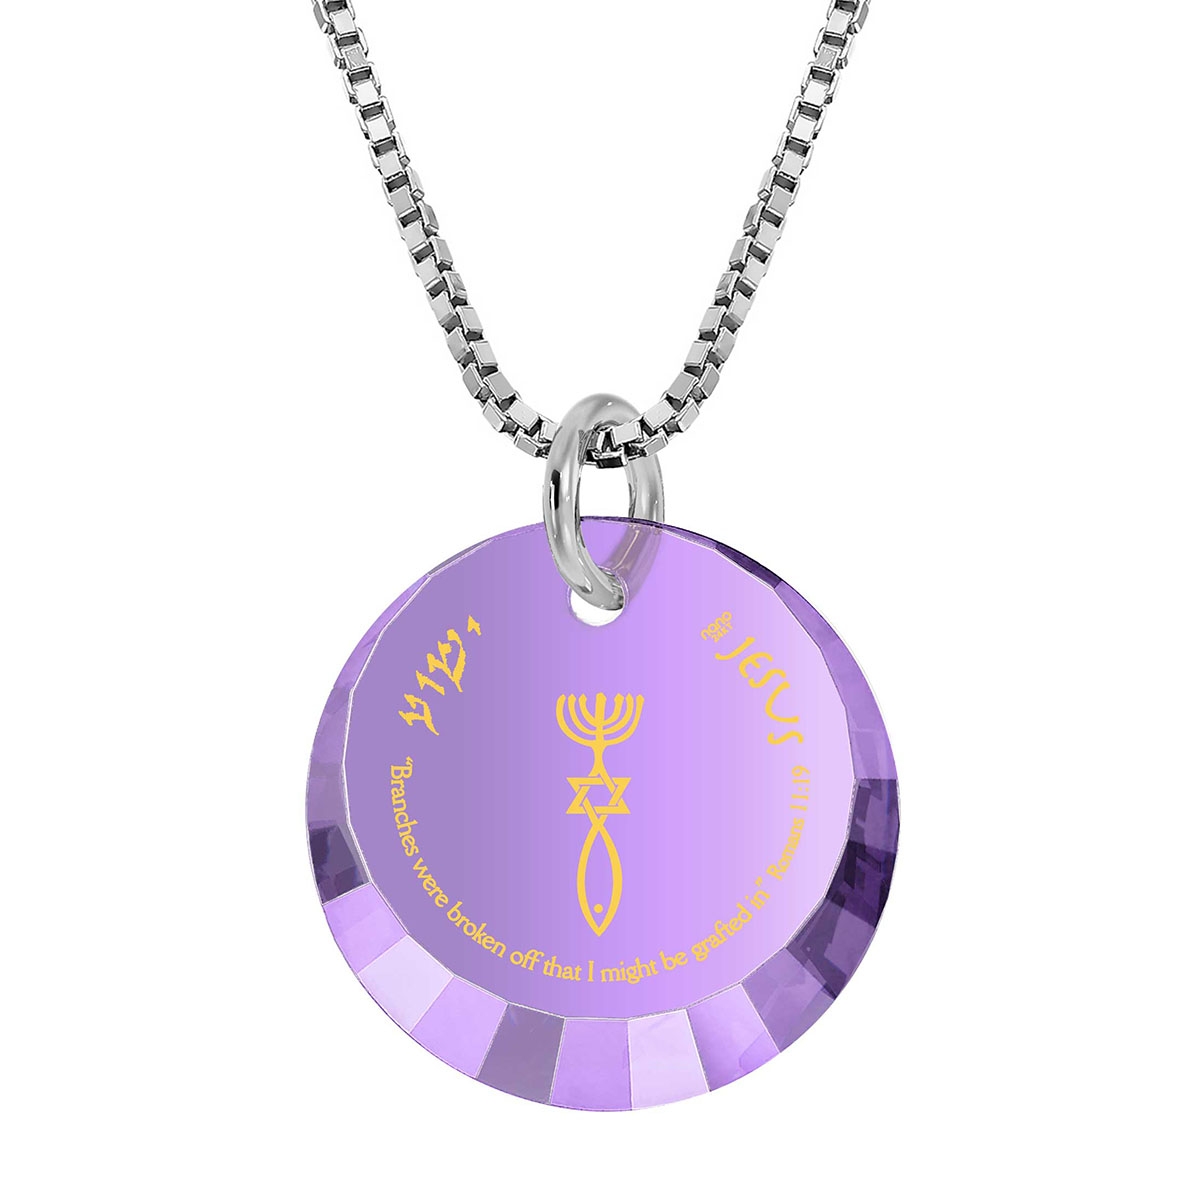 Nano Jewelry Sterling Silver & Gemstone Grafted-In Necklace with 24k Gold Micro-Inscription (Purple) - 1